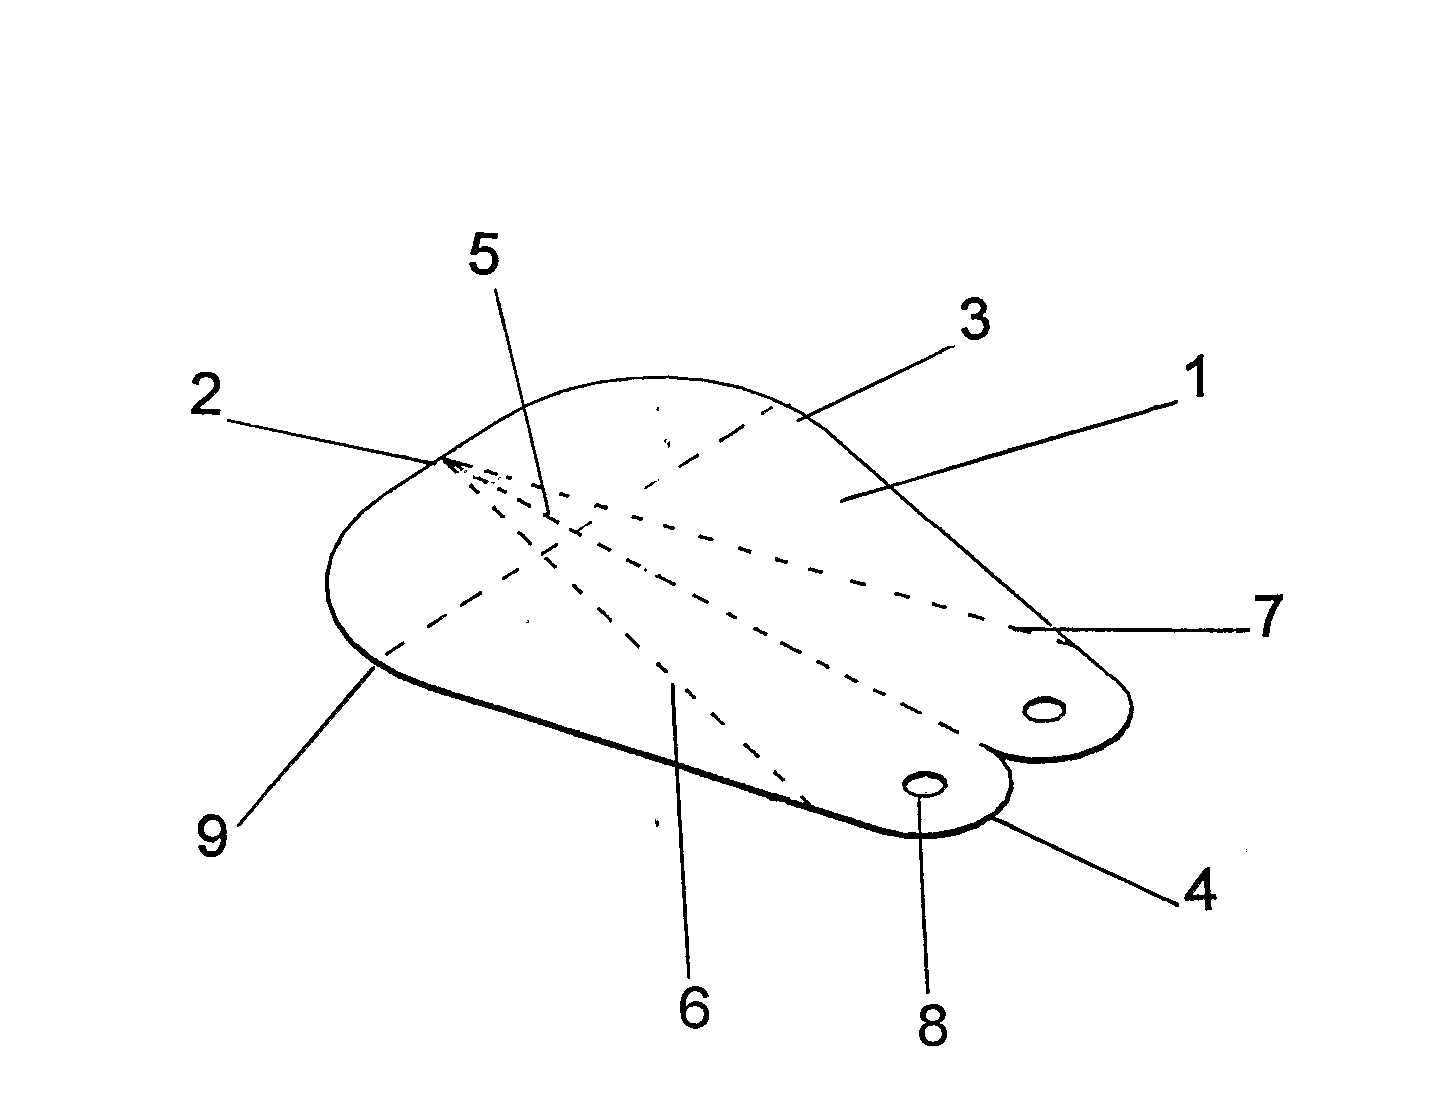 Multi-Function Surface Treatment Tool